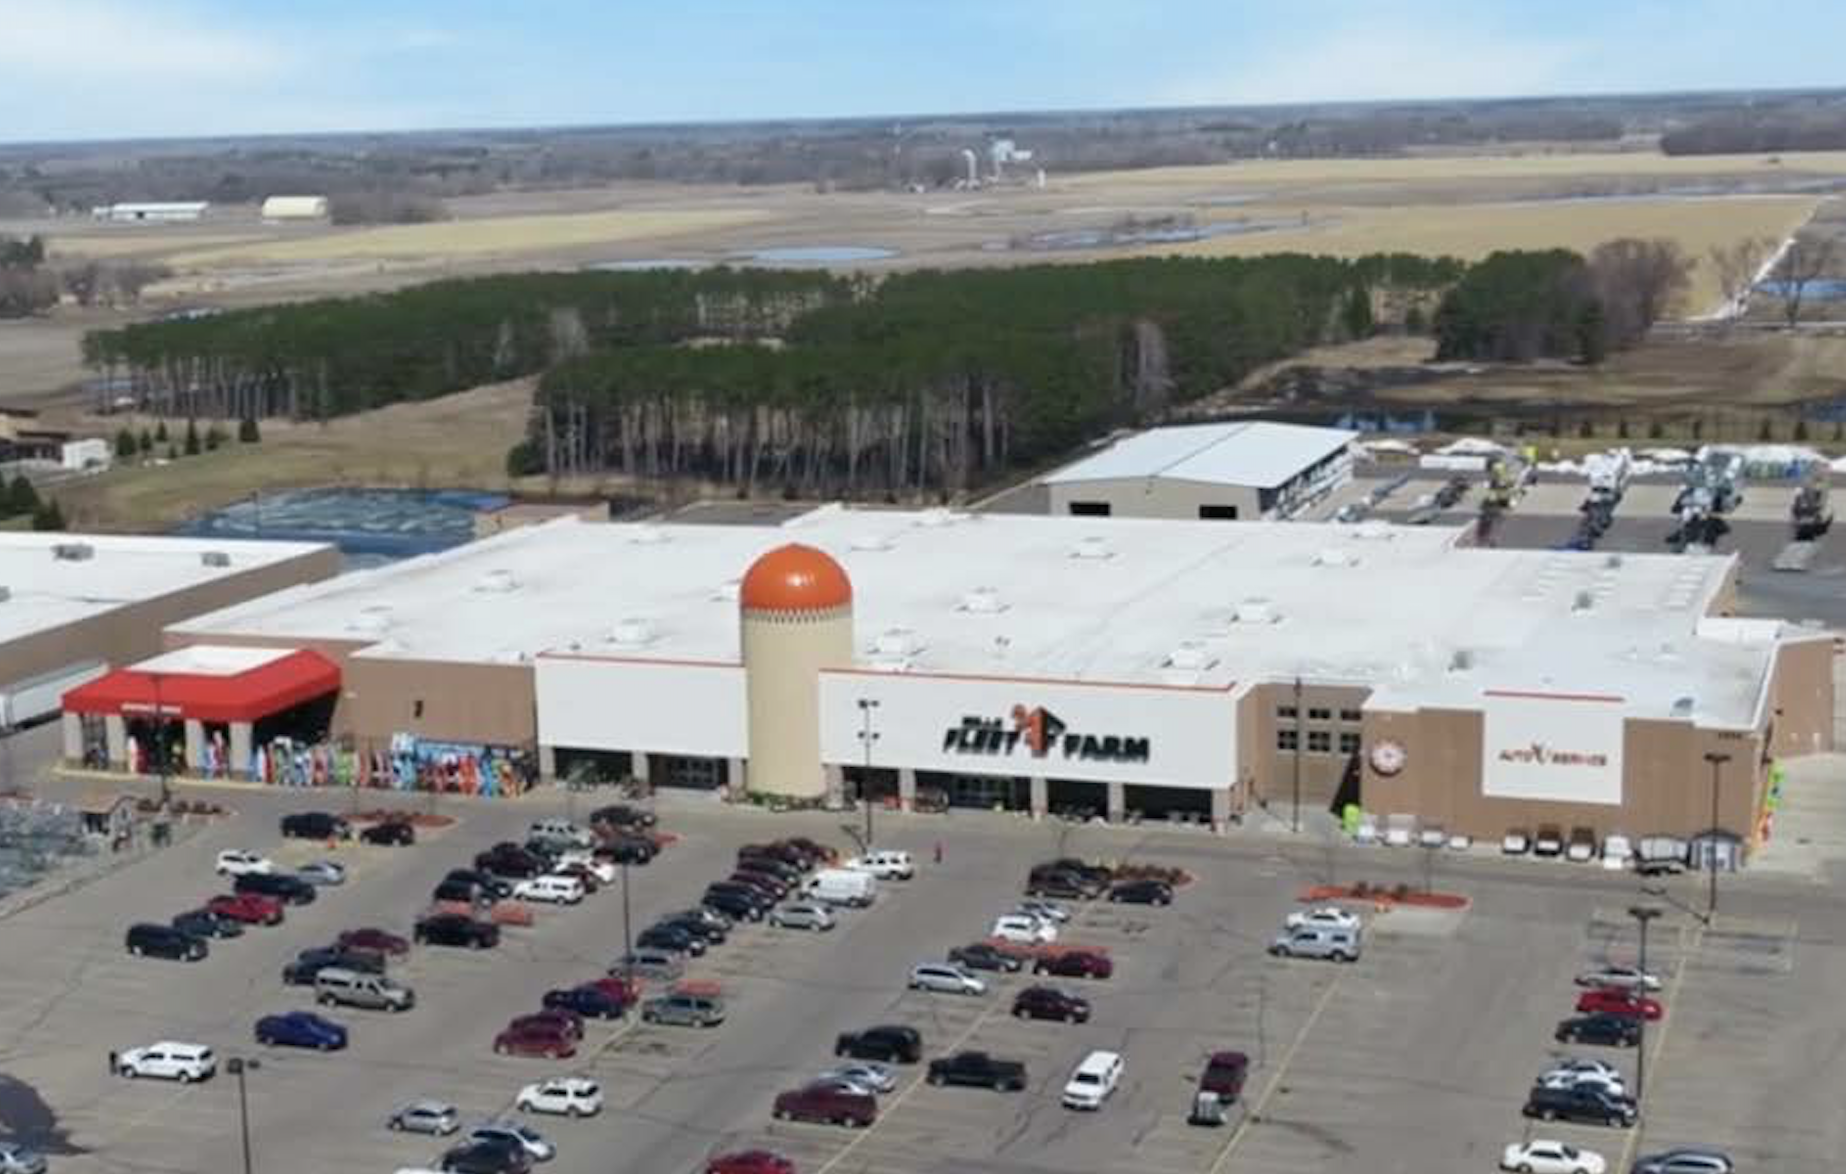 Kingsbarn Buys Two Fleet Farm Retail Centers for DST Offering